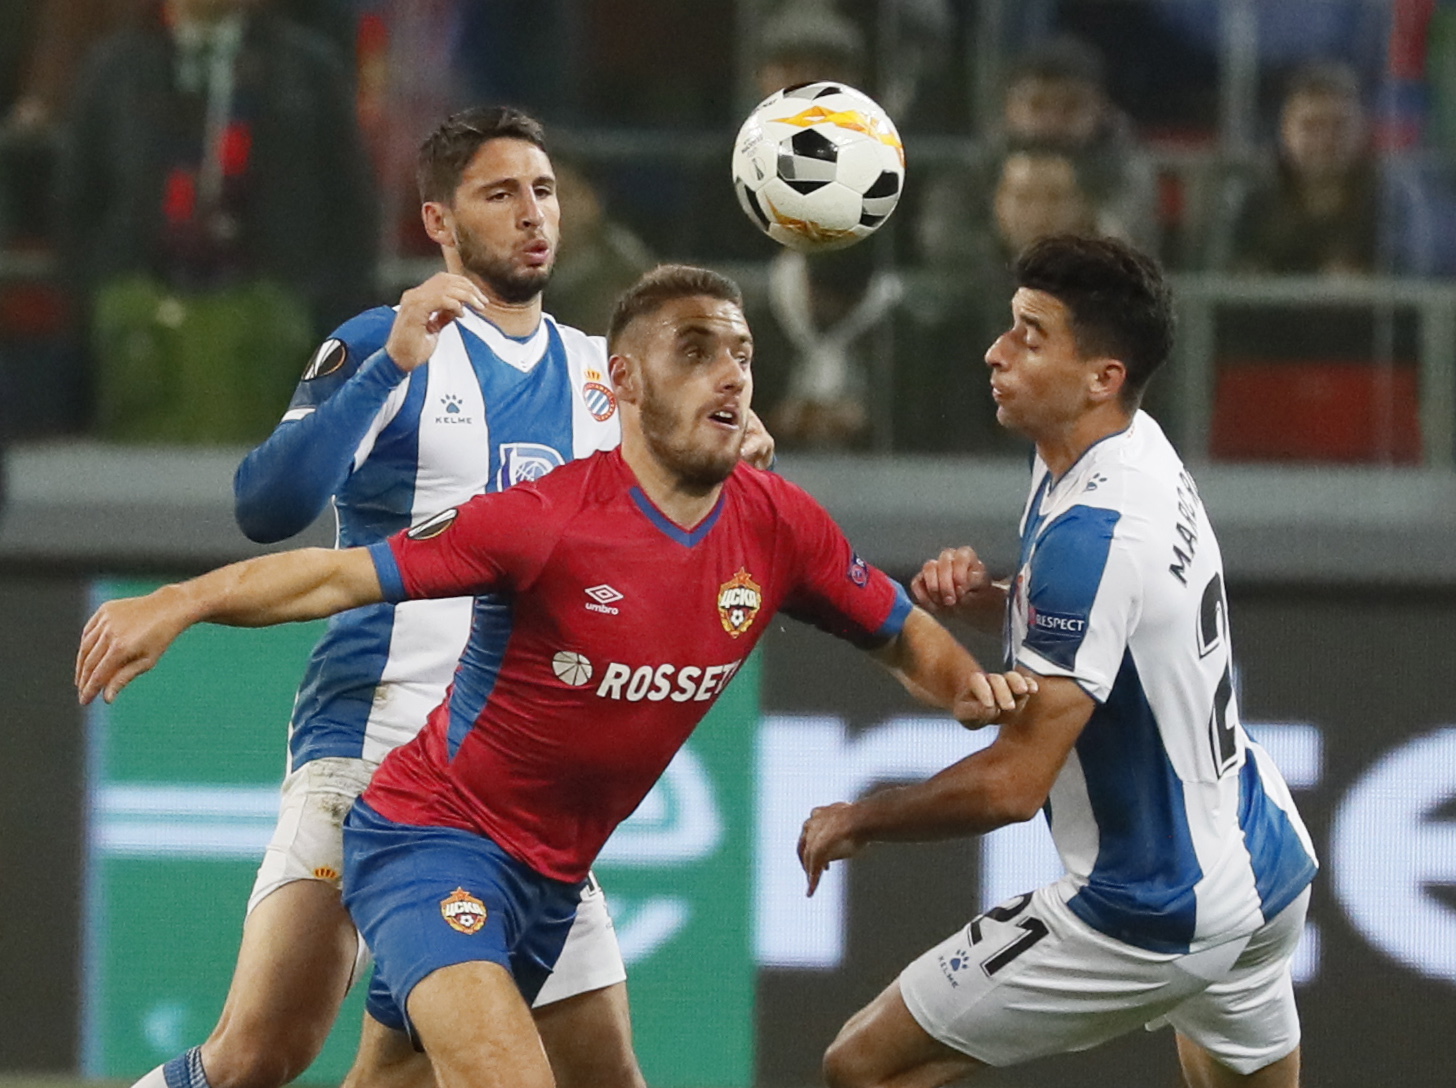 epa07893067 Marc Roca (R) of RCD Espanyol in action against Nikola Vlasic (C)  of CSKA during UEFA Europa League group stage match in Moscow, Russia, 03 October 2019.  EPA/MAXIM SHIPENKOV